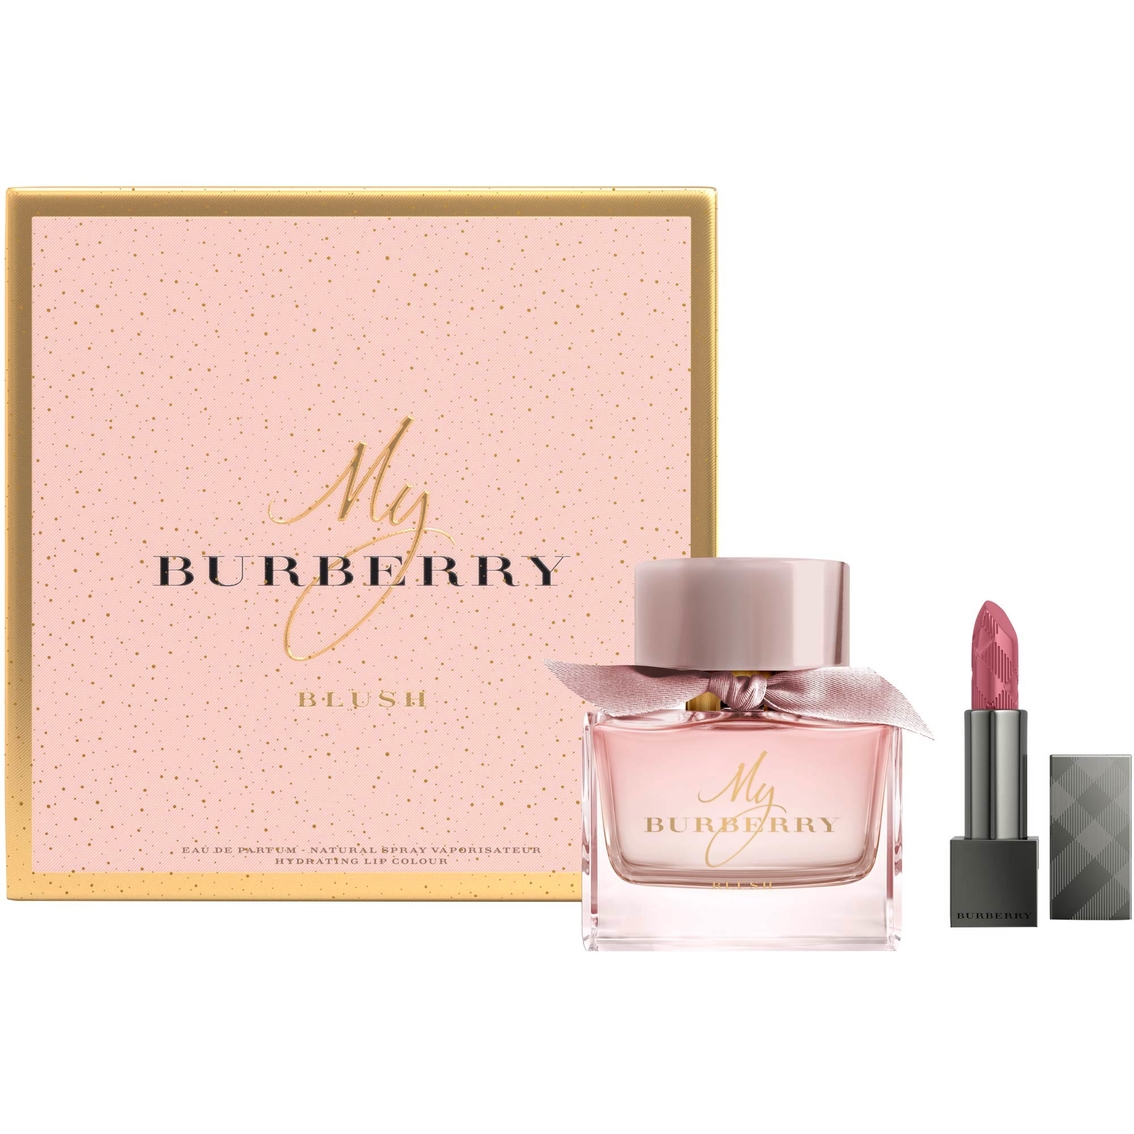 Antologi Resonate Menstruation Burberry My Burberry Blush Gift Set | Gifts Sets For Her | Beauty & Health  | Shop The Exchange